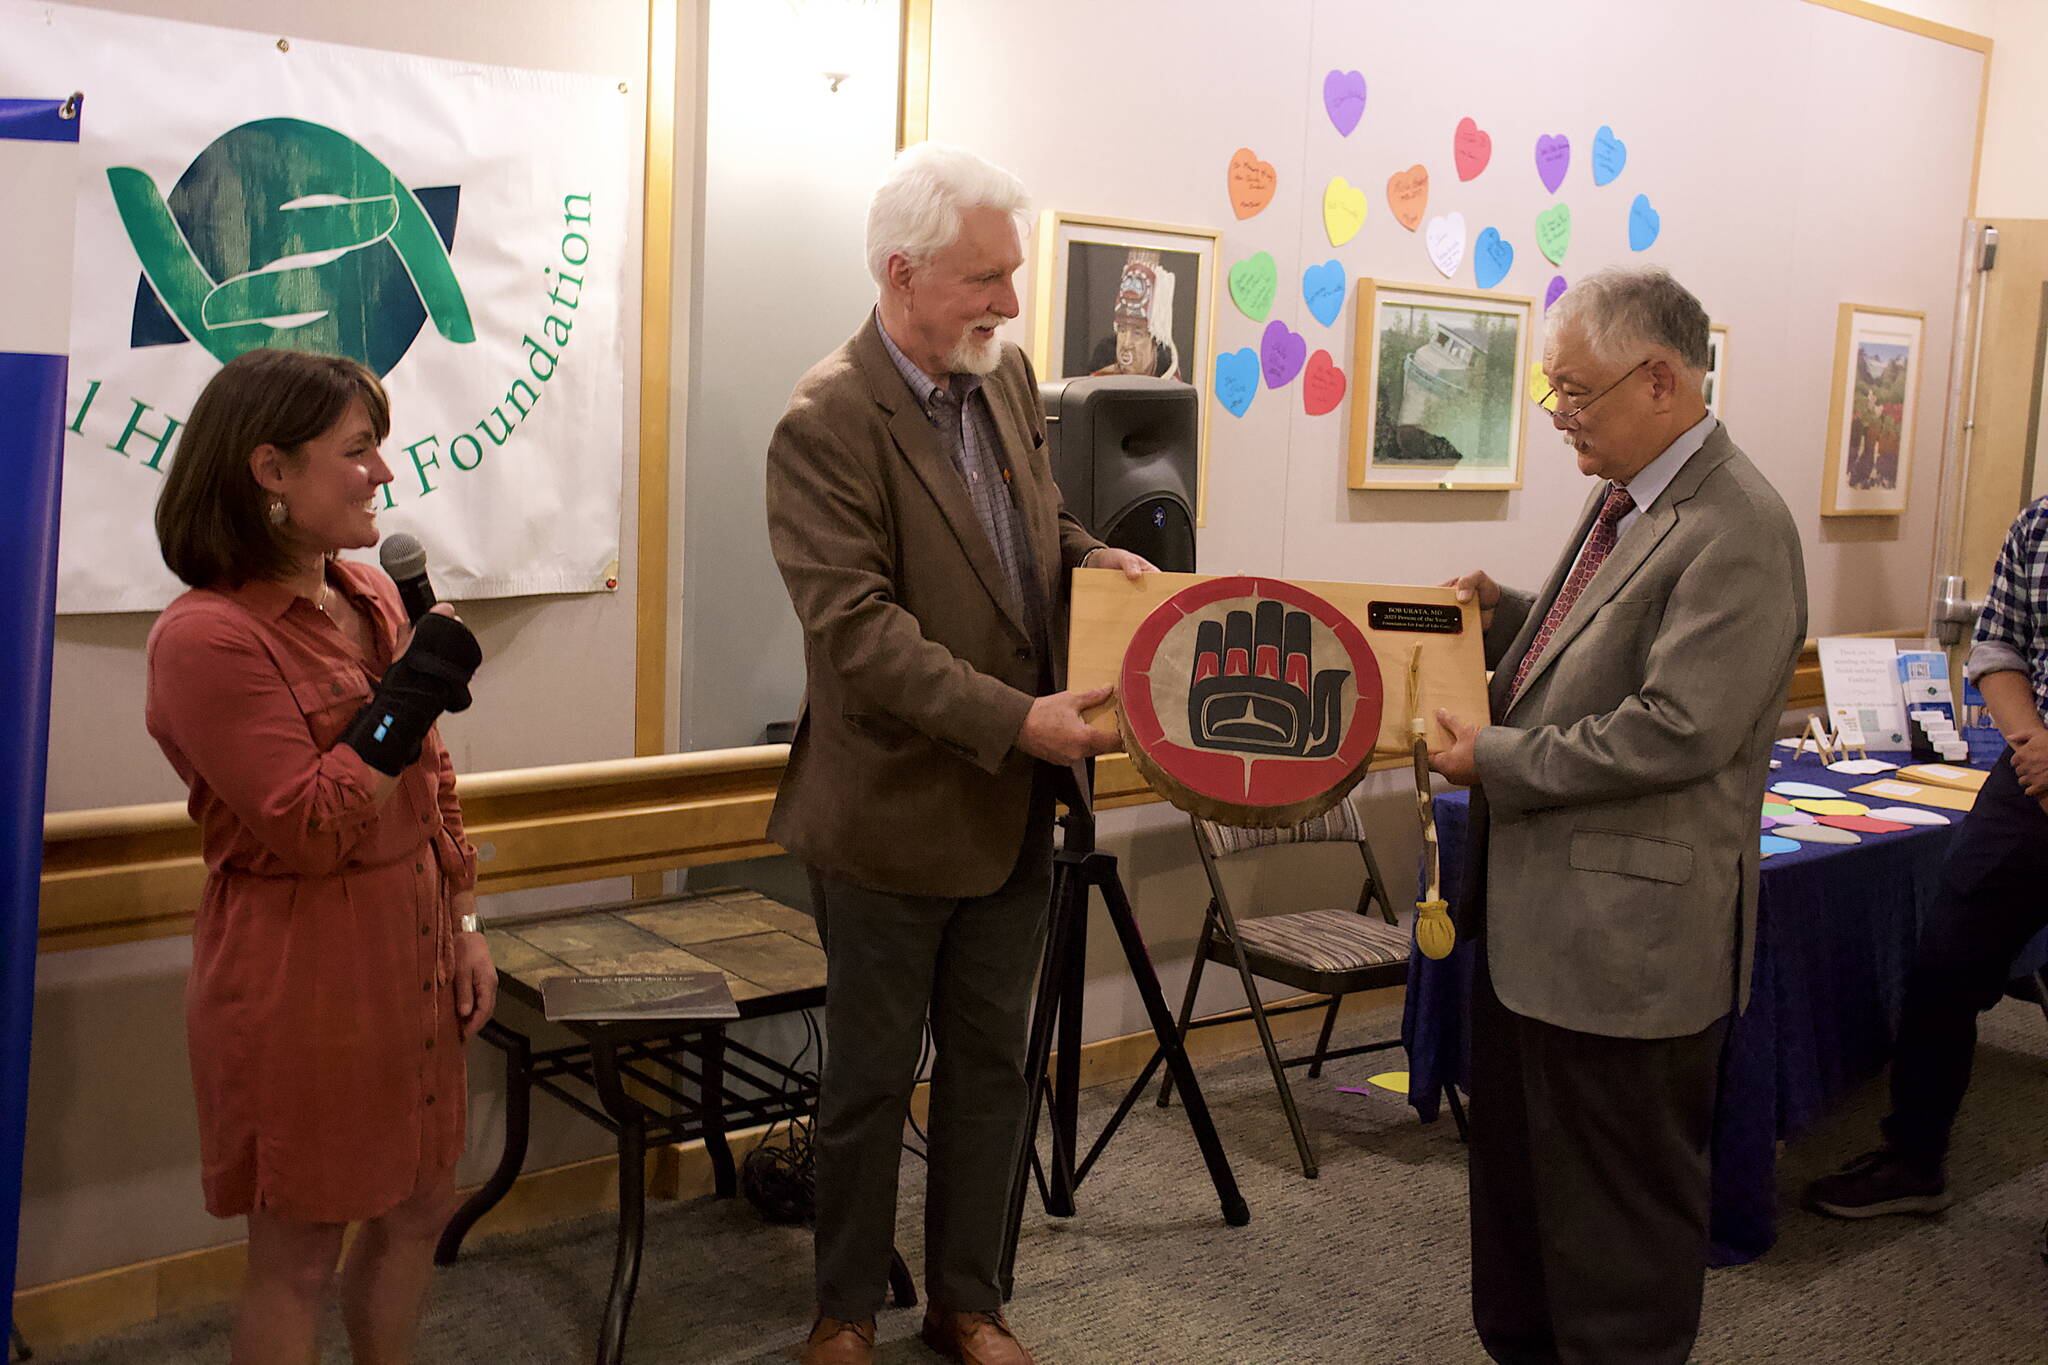 Bob Urata (right), a doctor credited with establishing and growing hospice care in Juneau, is presented with the “Person of the Year” award by the Foundation for End of Life Care by Hal Geiger, a member of Bartlett Regional Hospital’s board of directors during a ceremony on Thursday. Seanna O’Sullivan (left), president of the foundation, said Urata was an essential presence for her family after her husband was diagnosed with a fatal illness. (Mark Sabbatini / Juneau Empire)